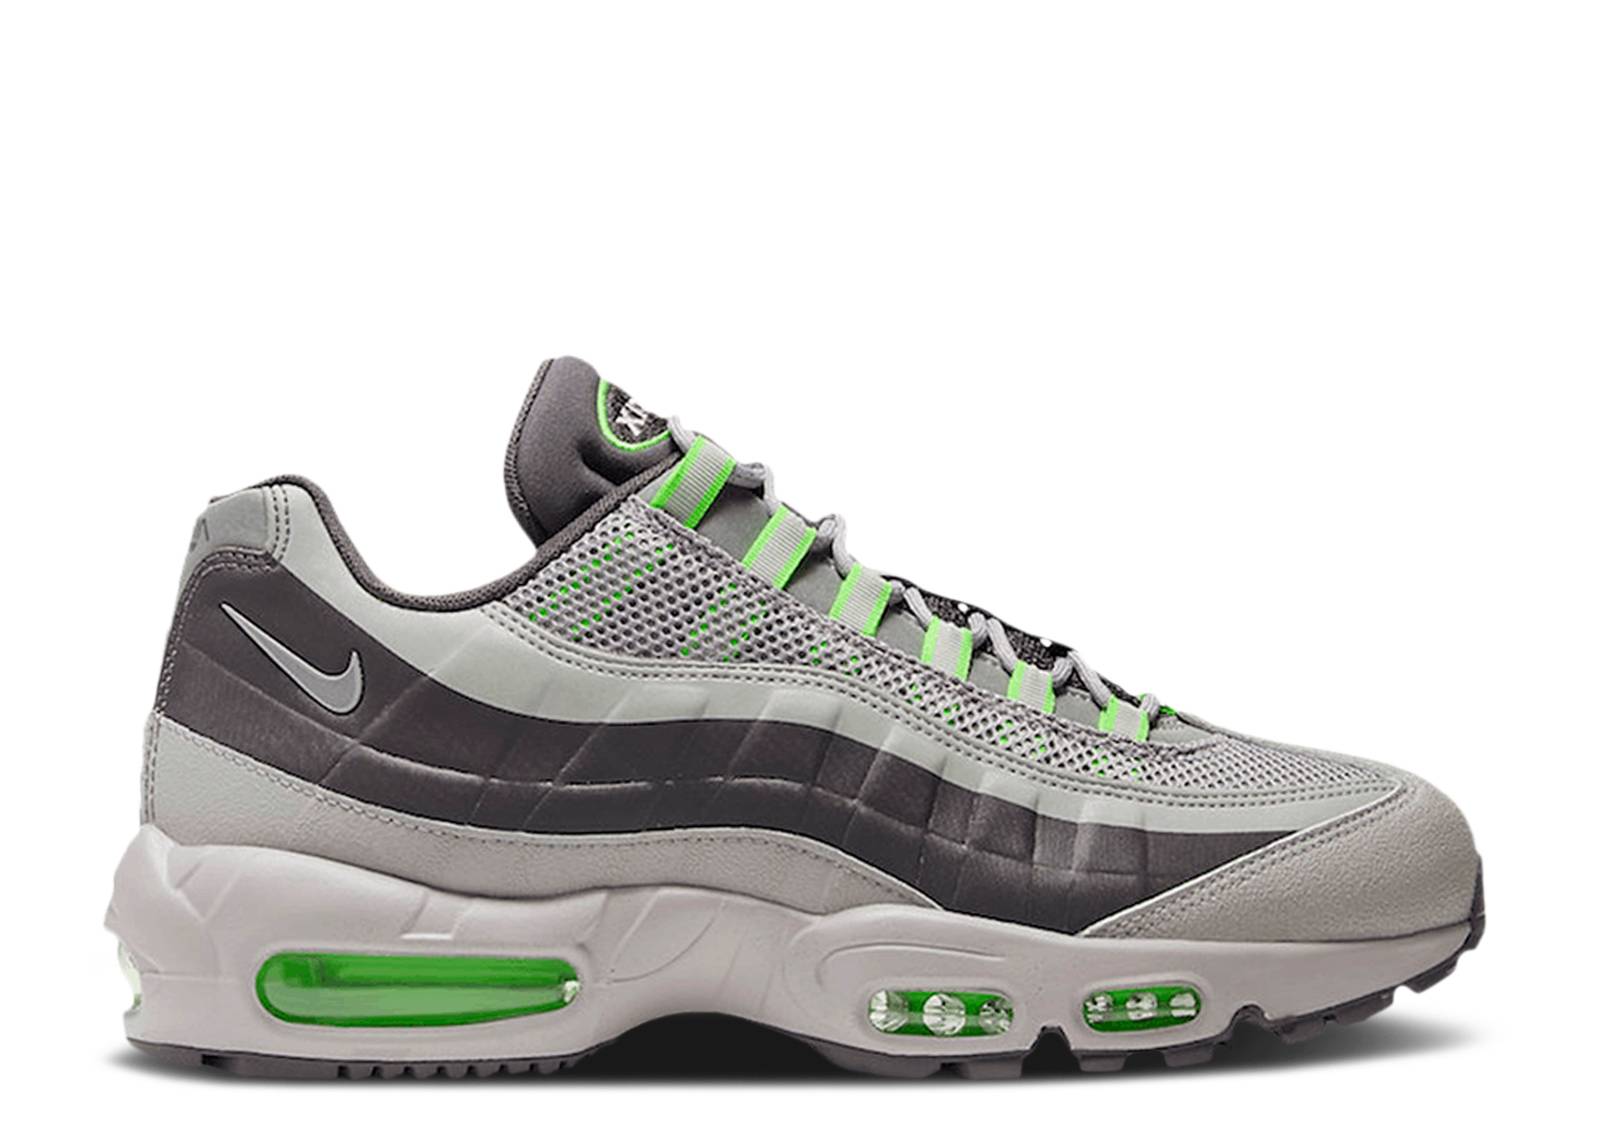 Air Max 95 Winter Utility 'Electric Green'